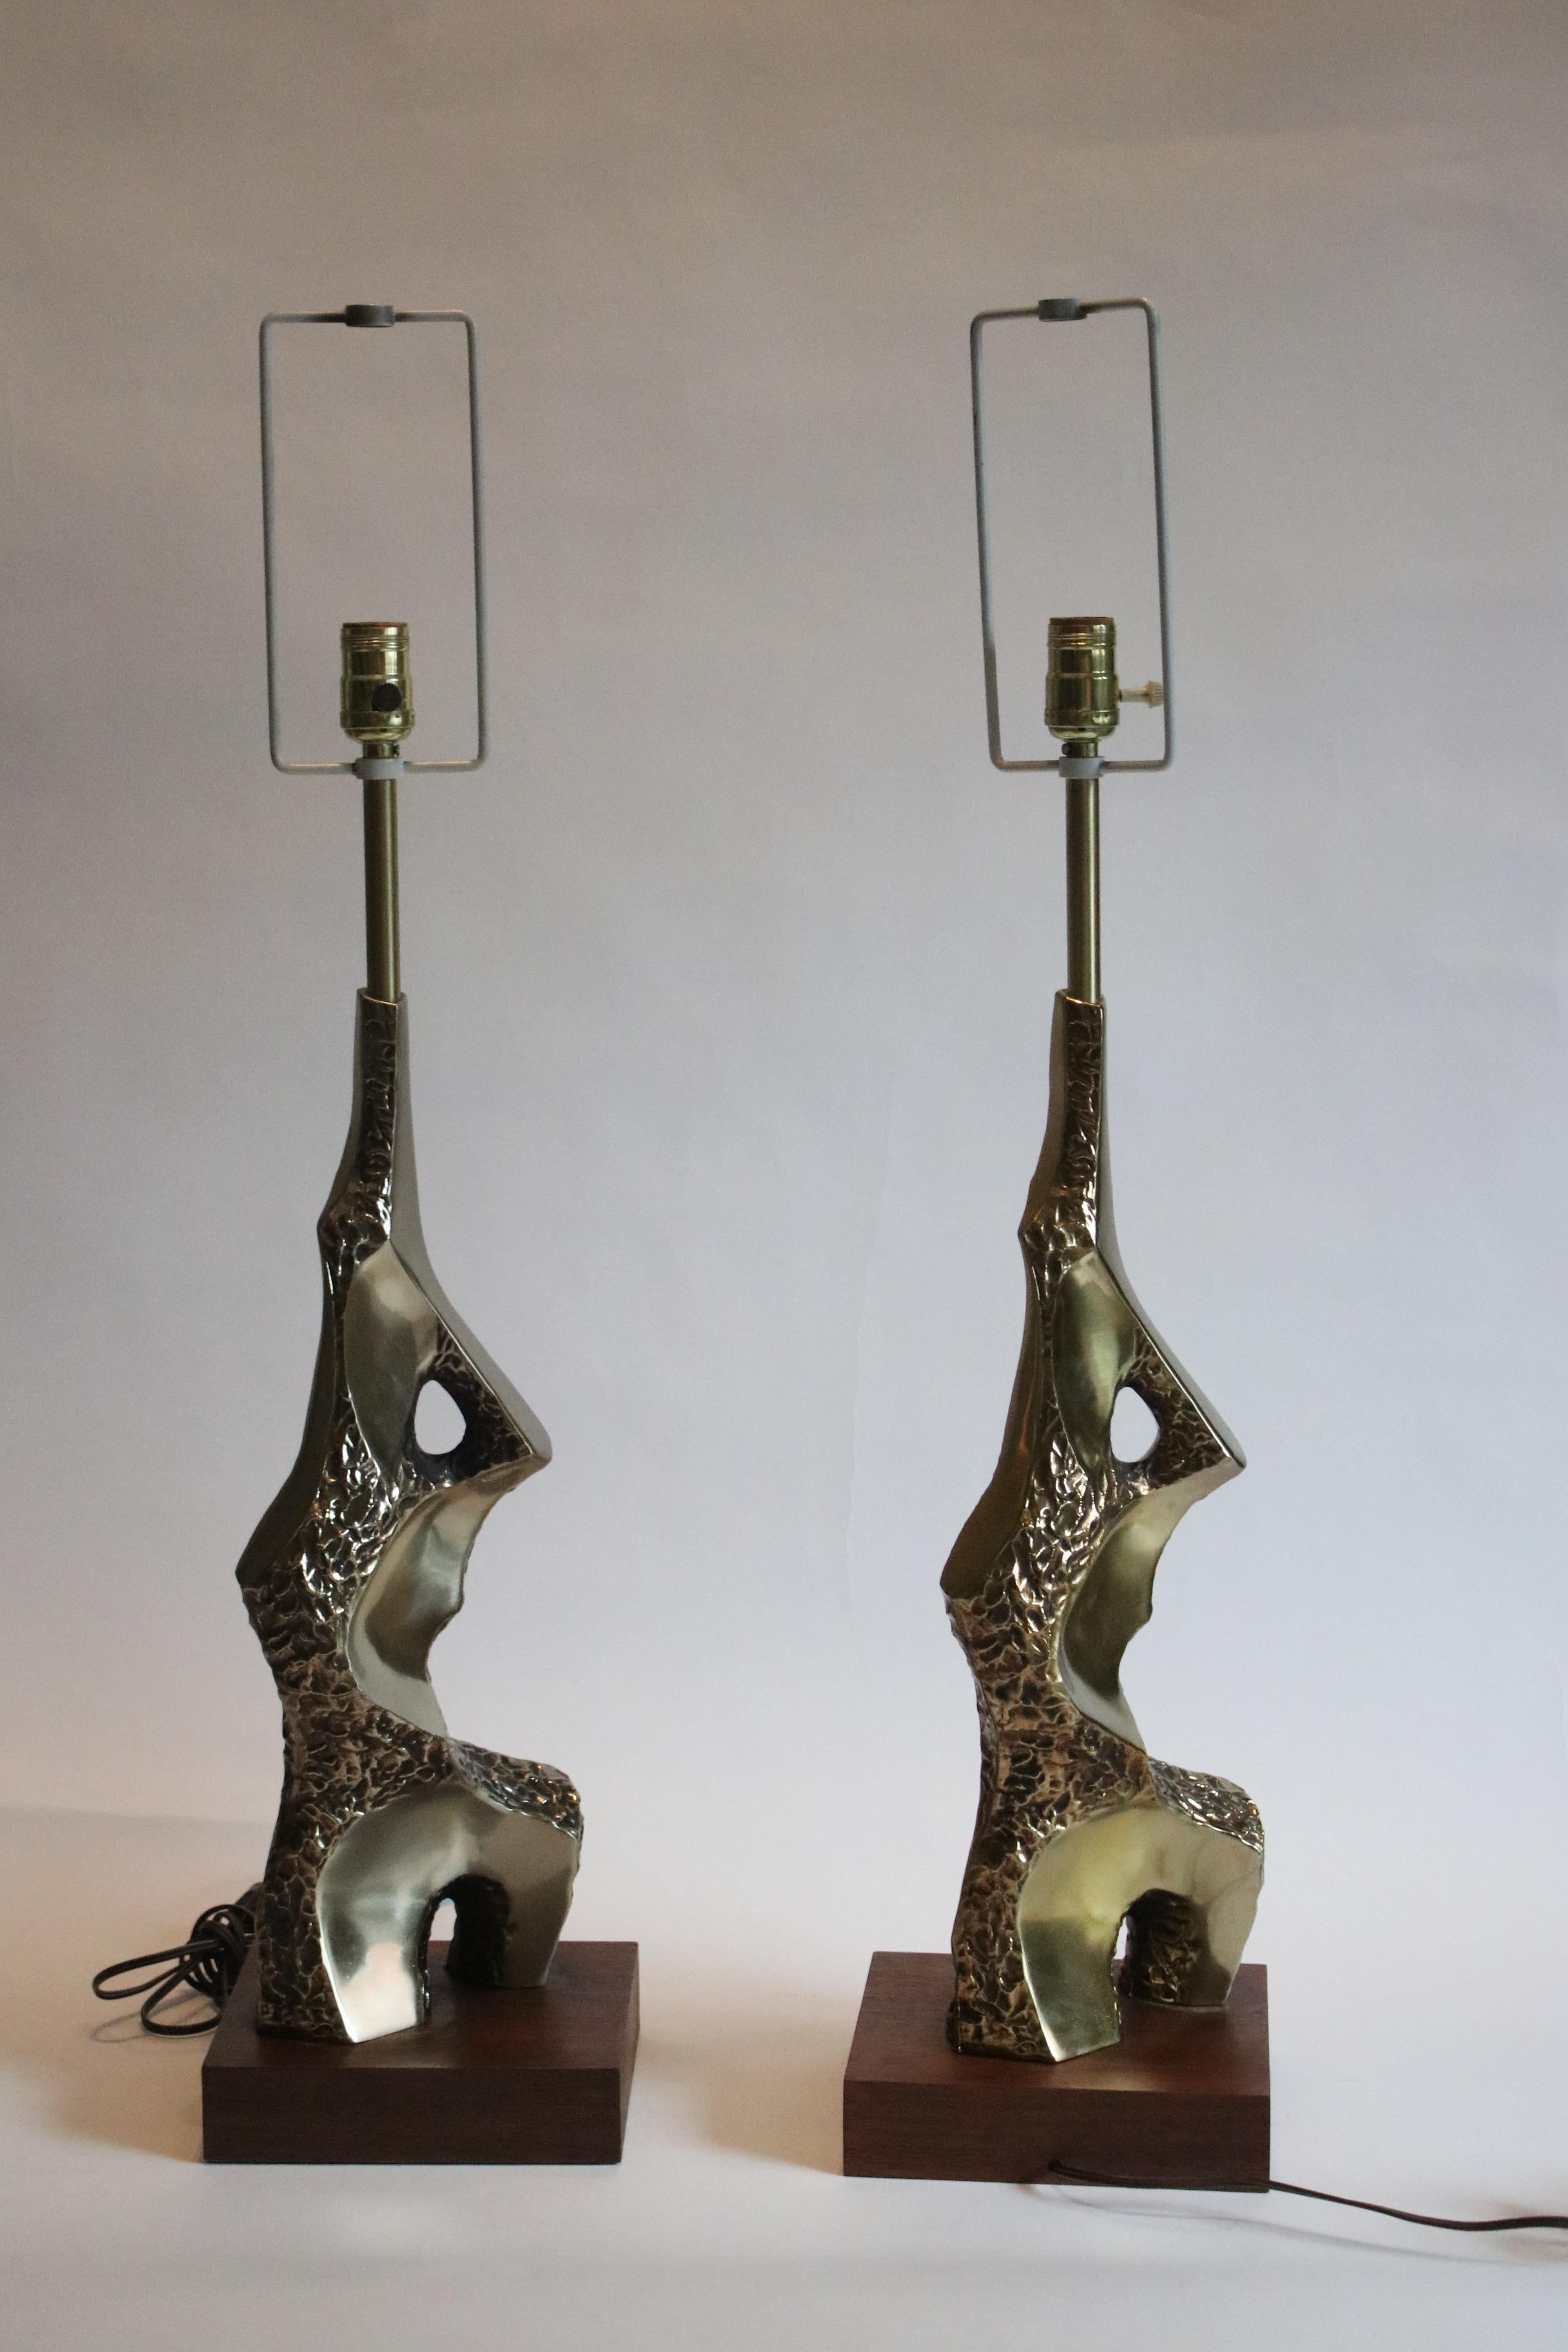 Pair of sculptural torso lamps from the Brutalist period by Laurel Lamp Co., 1960s. Often mistakenly attributed to Maurizio Tempestini, these table lamps are all original brass metal on walnut plinths. Measurement from bottom of the base to the top